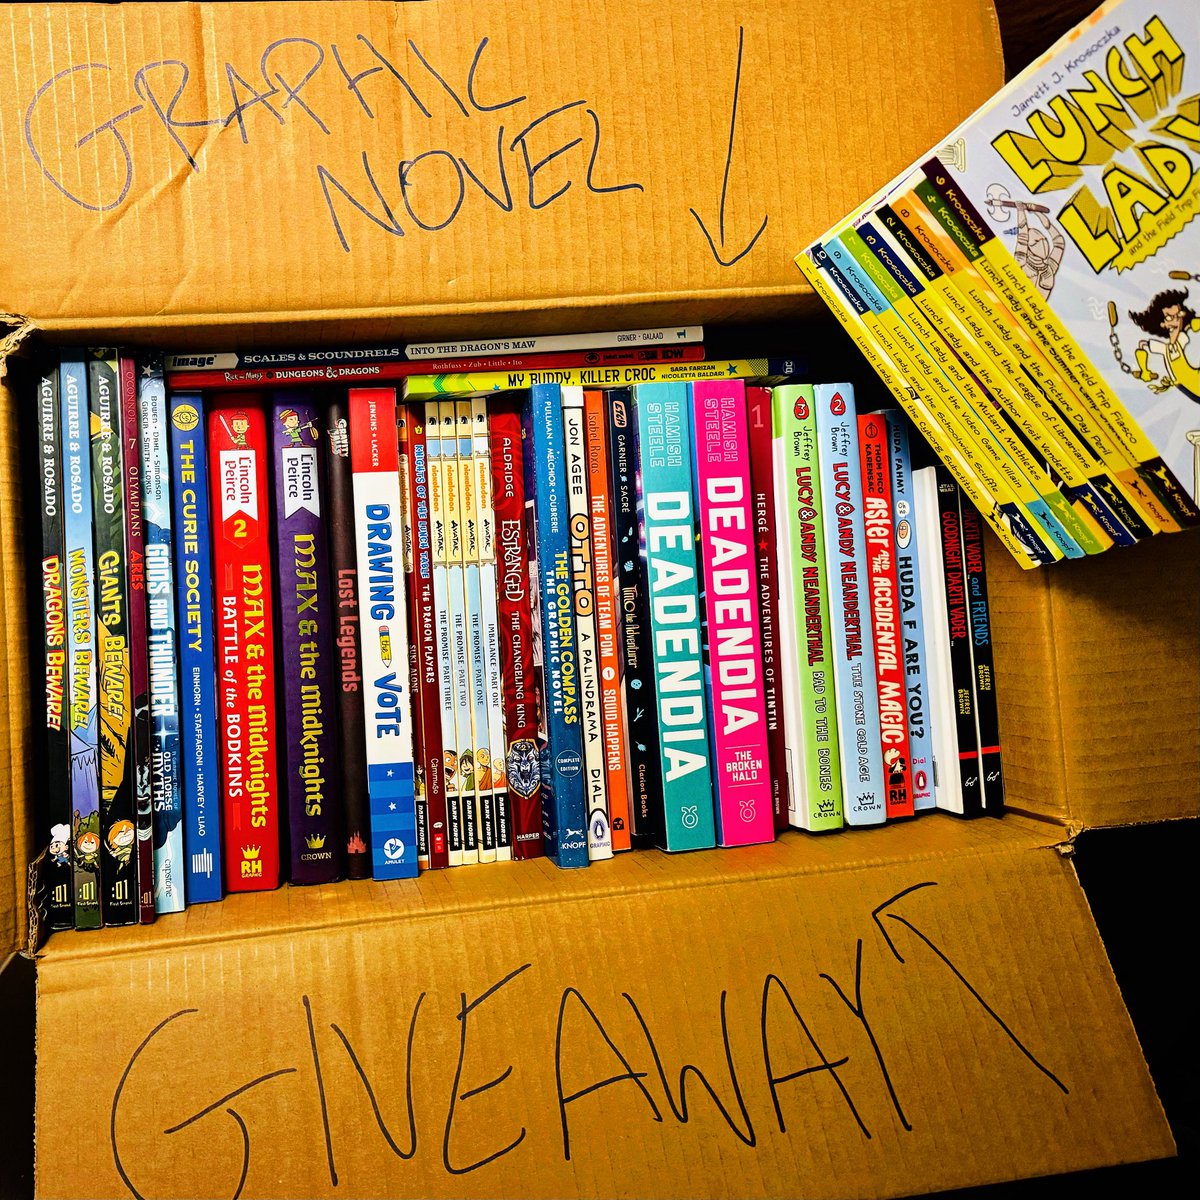 Teachers, librarians, educators, parents, & readers! Time for a HUGE #giveaway! I need to find these 42(!) graphic novels a new home! FOLLOW, ❤️, RT/QT and/or Comment+Tag a friend to enter for a chance to add these great books 📚 to your collection! Winner selected 11/19.